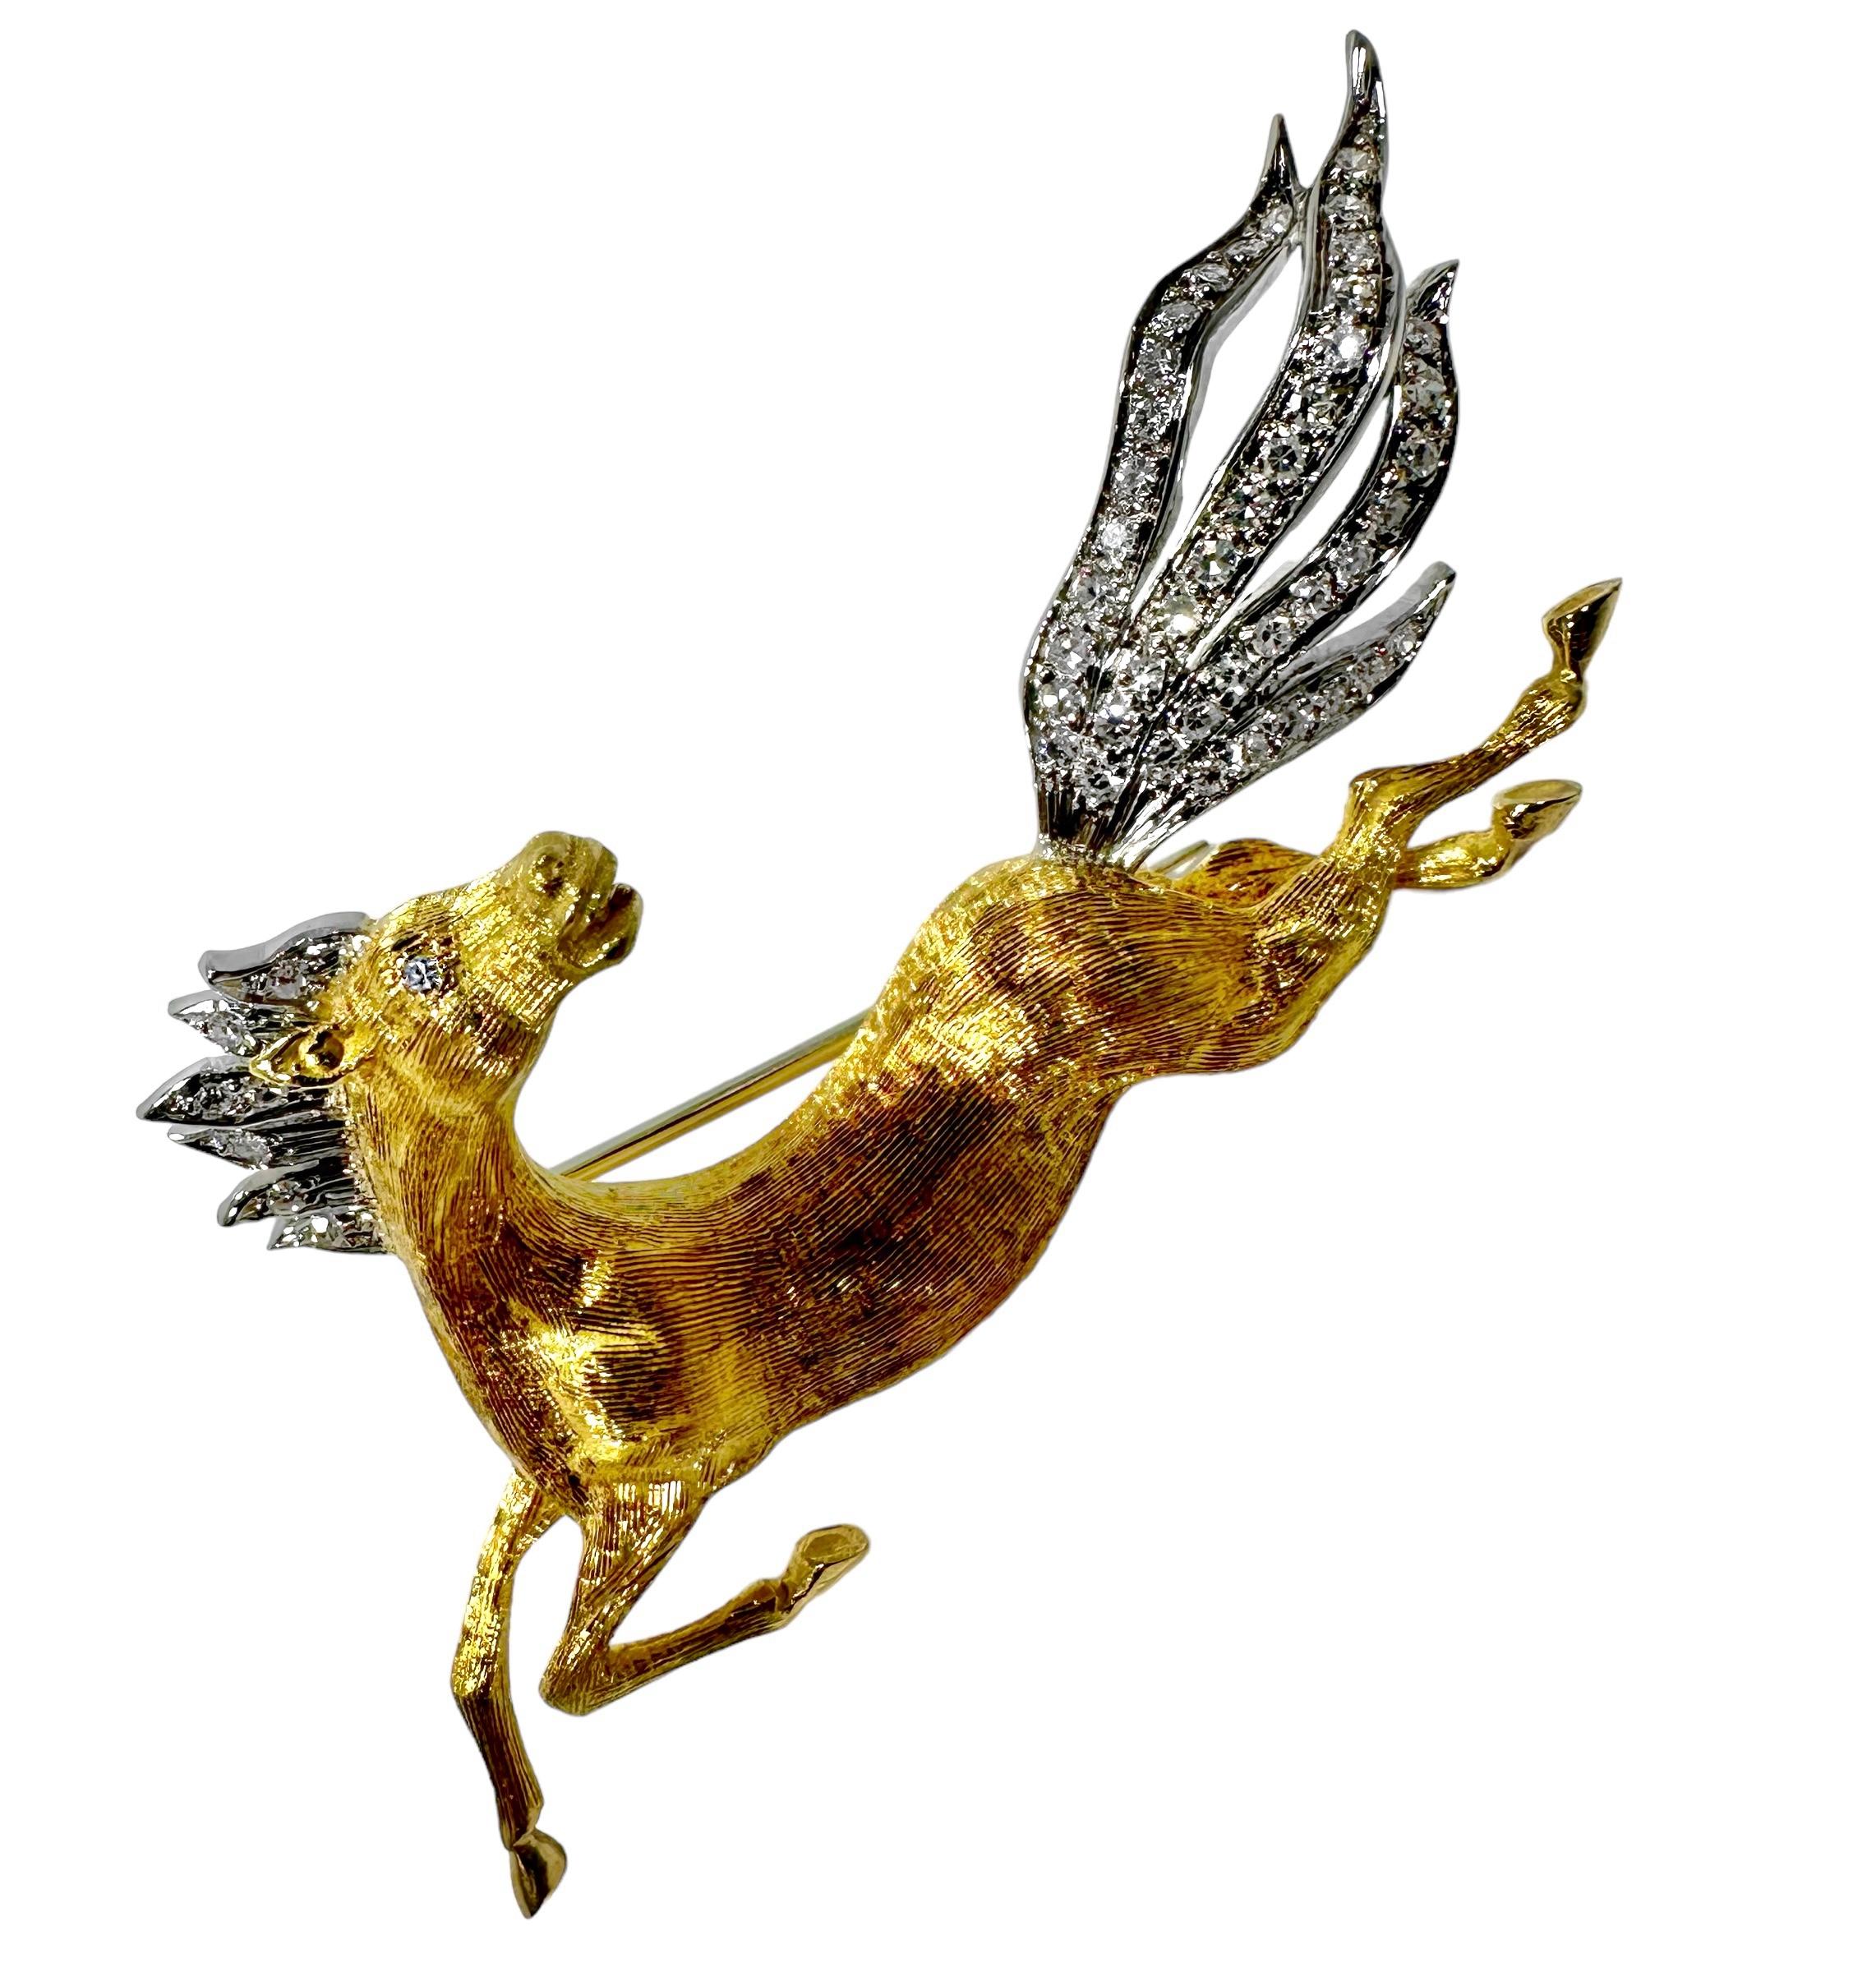 This very realistic 18k yellow and white gold rendition of a wild horse running at full gallop is an absolute delight. The sense of motion is palpable, with the diamond set mane and tail flowing in the wind, and legs pounding the earth. In addition,